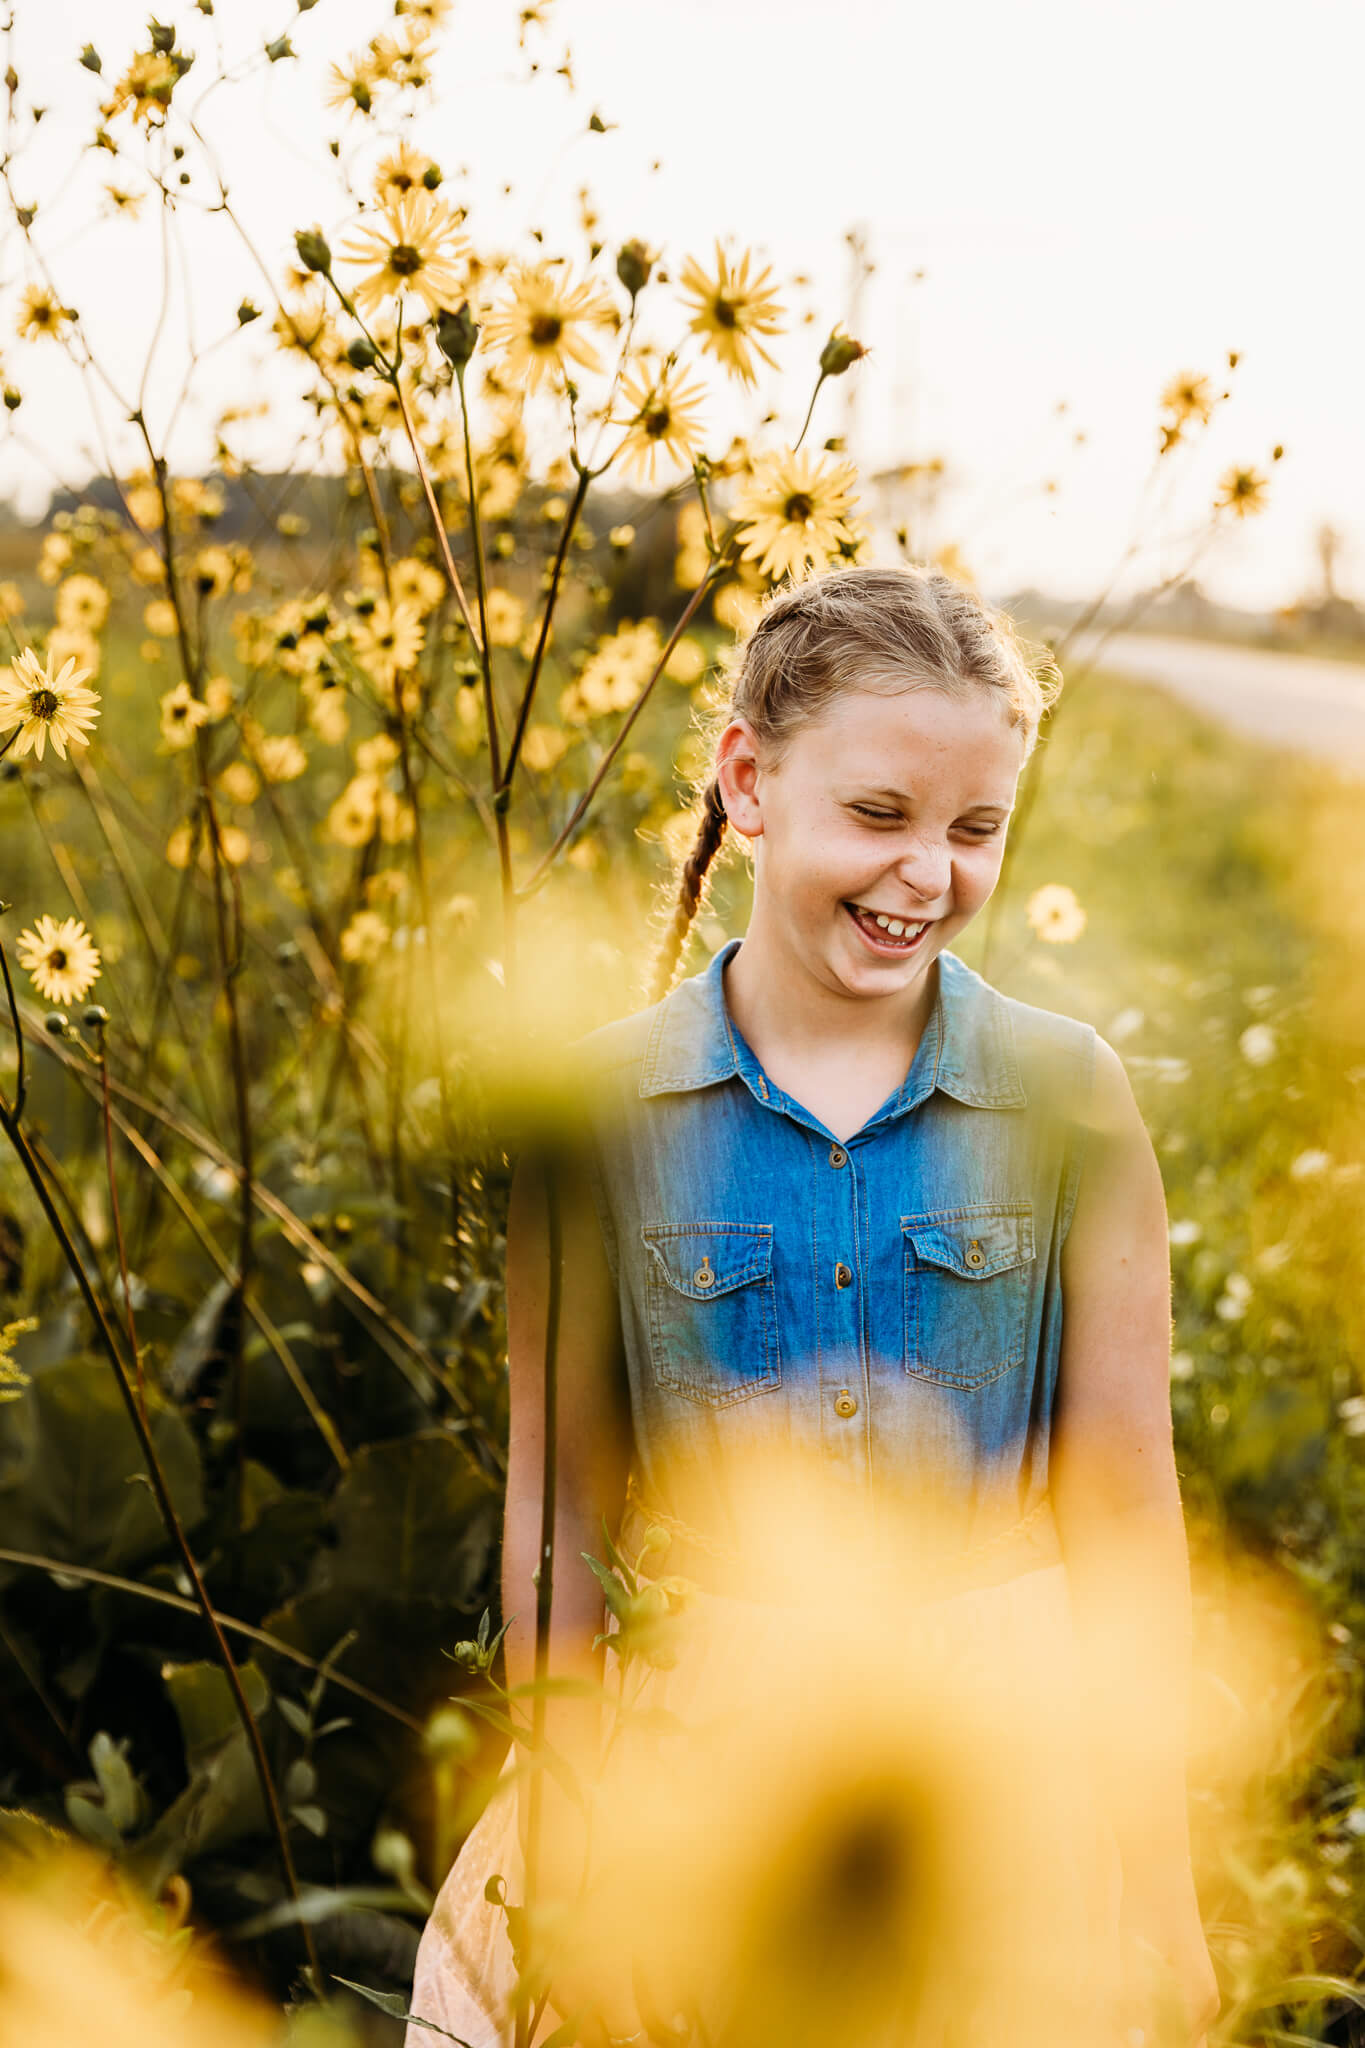 young girl laughing in a field of wild flowers by Ashley Kalbus for blog about Thedacare Pediatrics